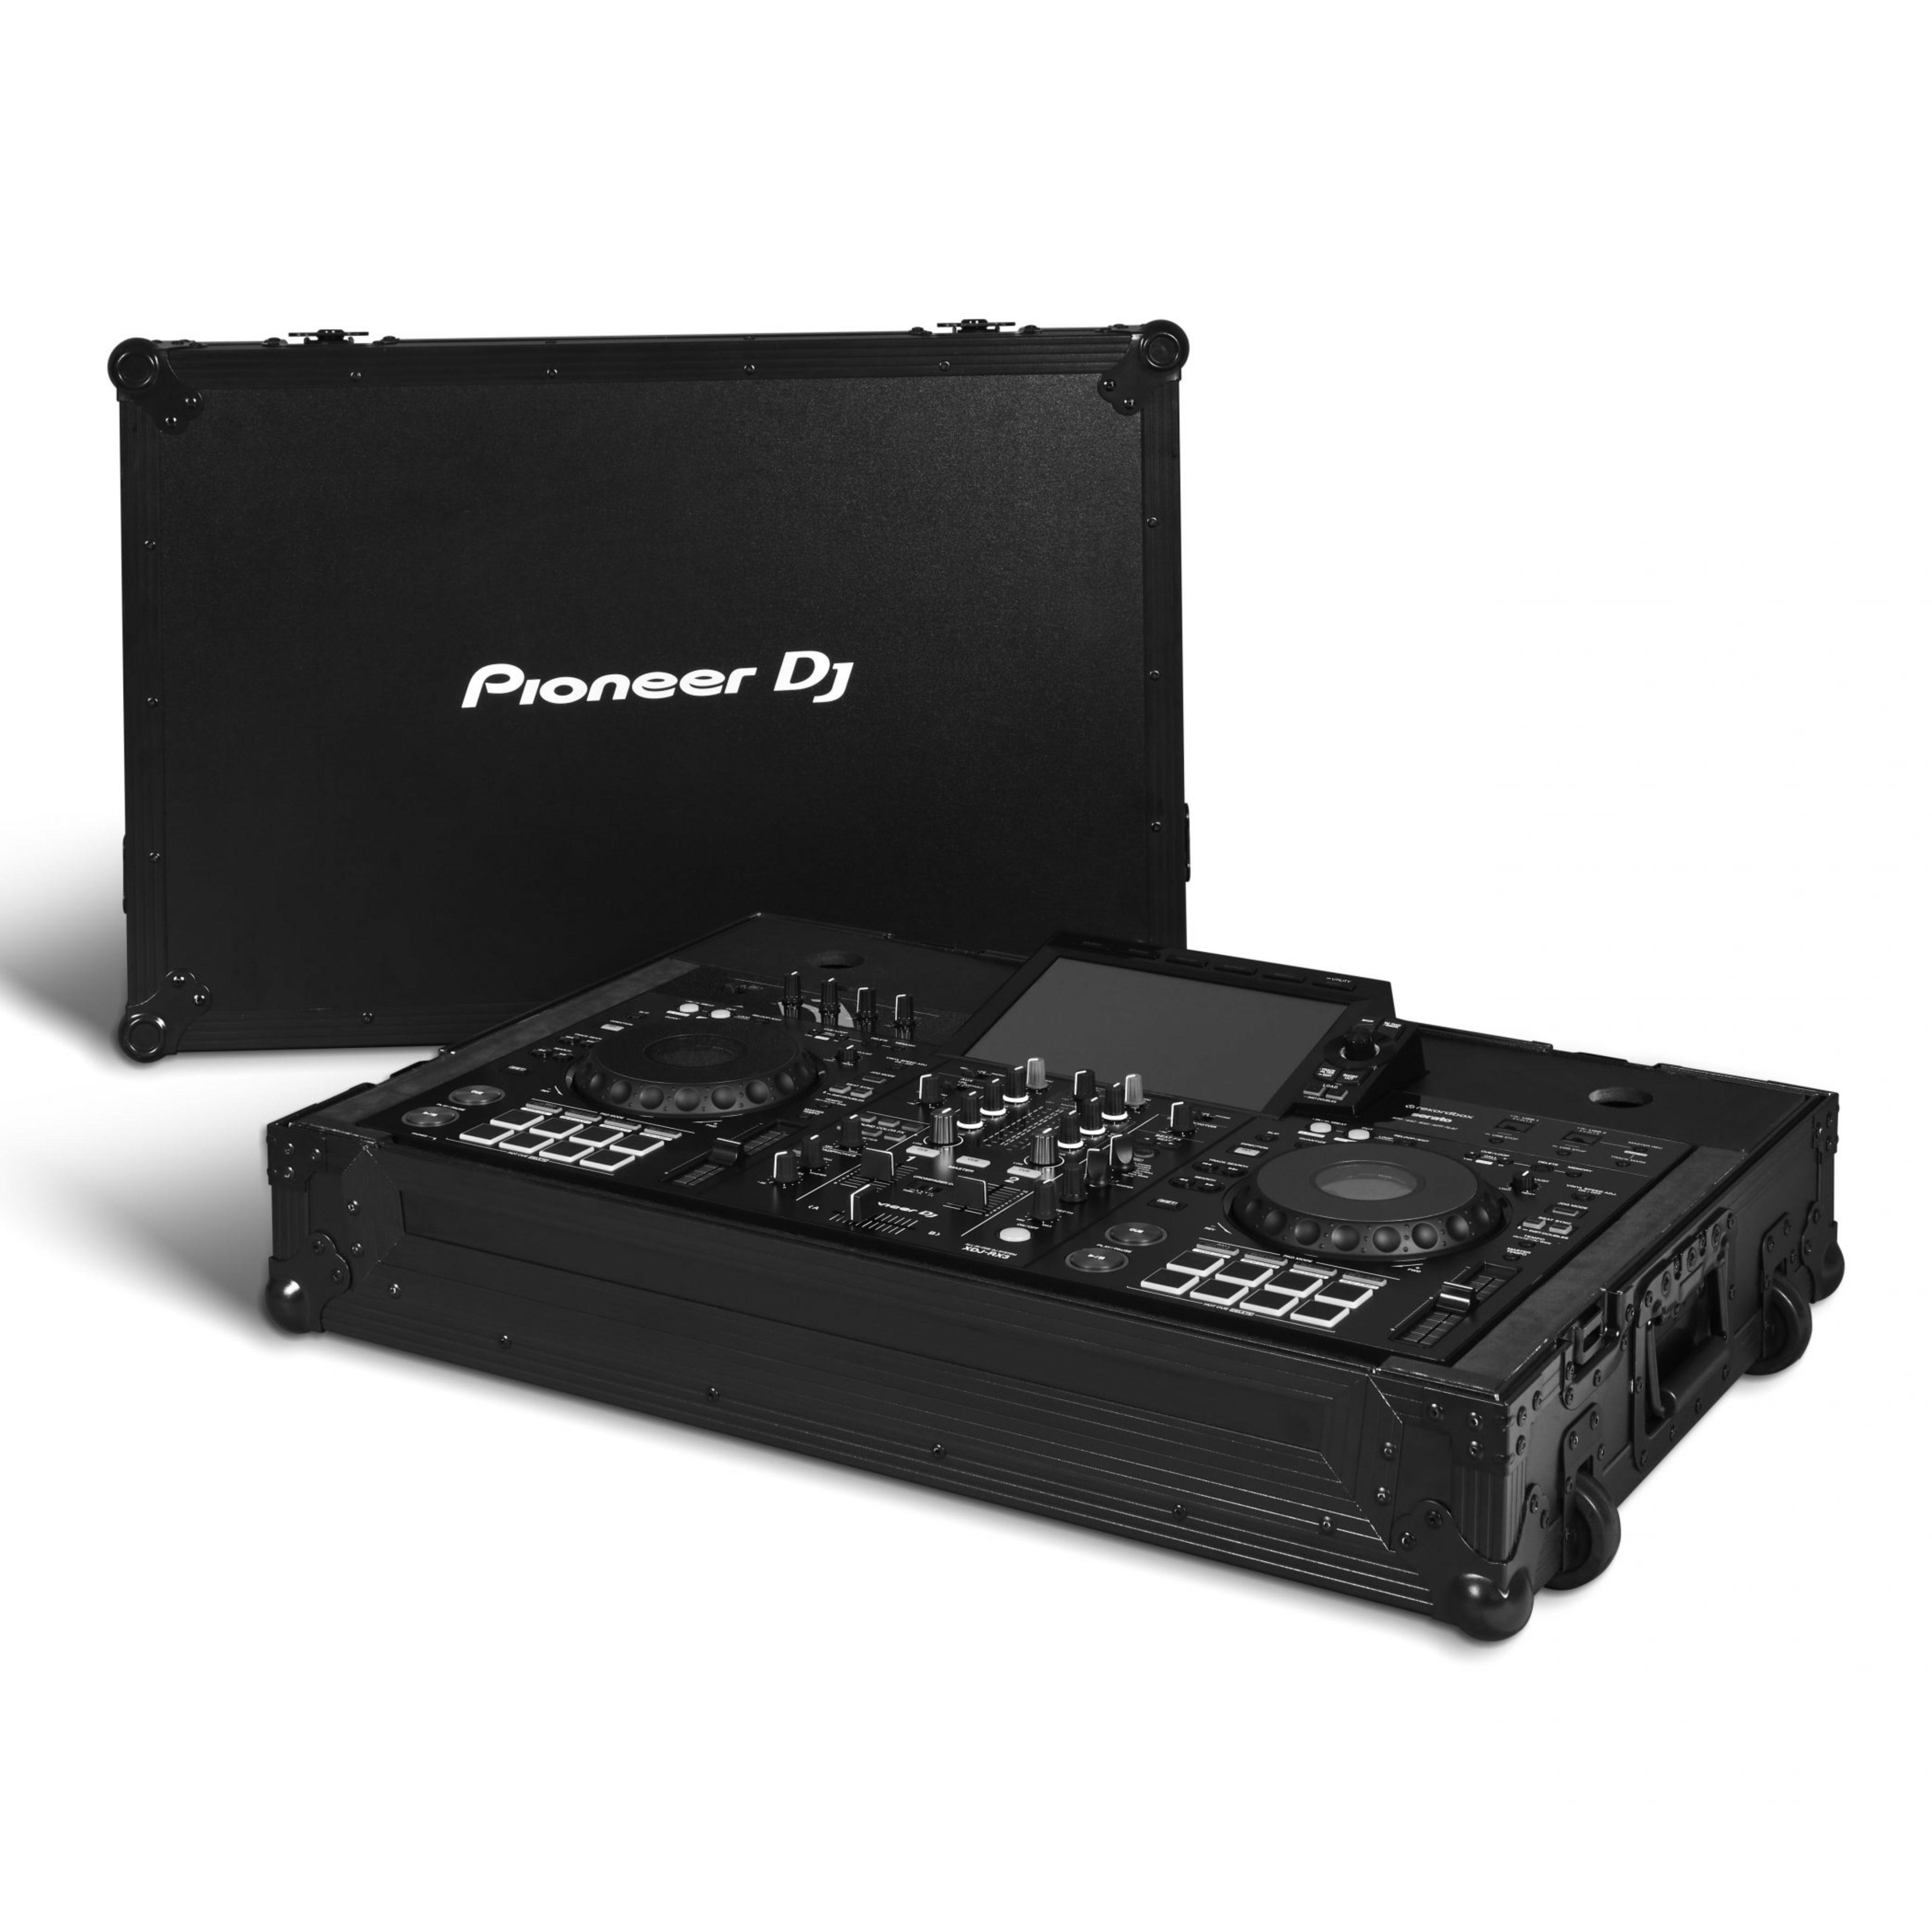 Pioneer DJ FLT-XDJRX3 Ope with lid and RX3